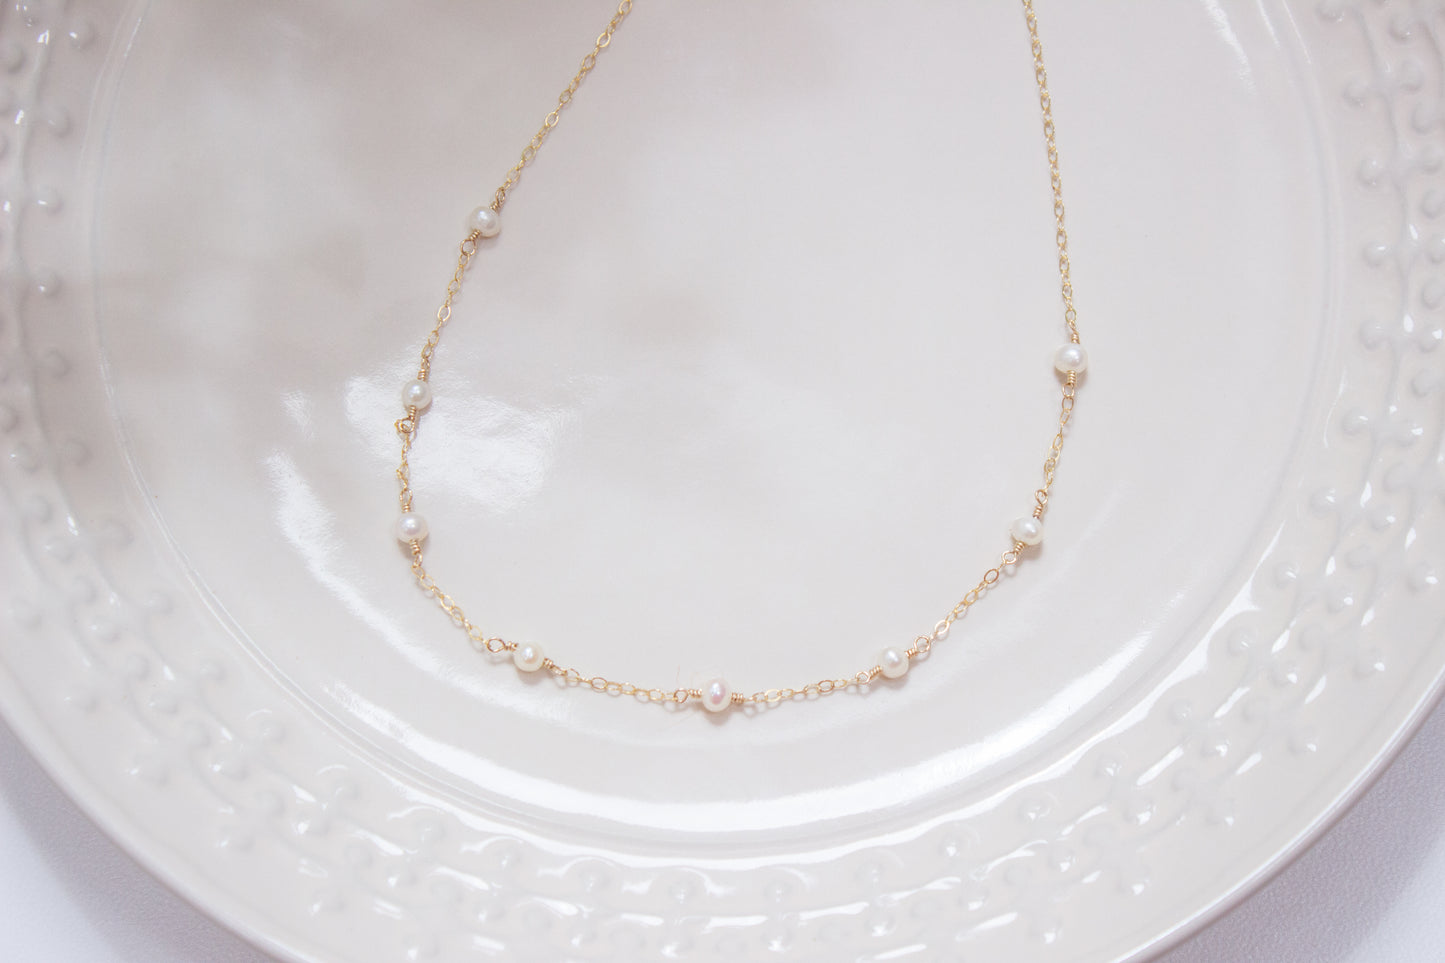 Pearl Dot Necklace